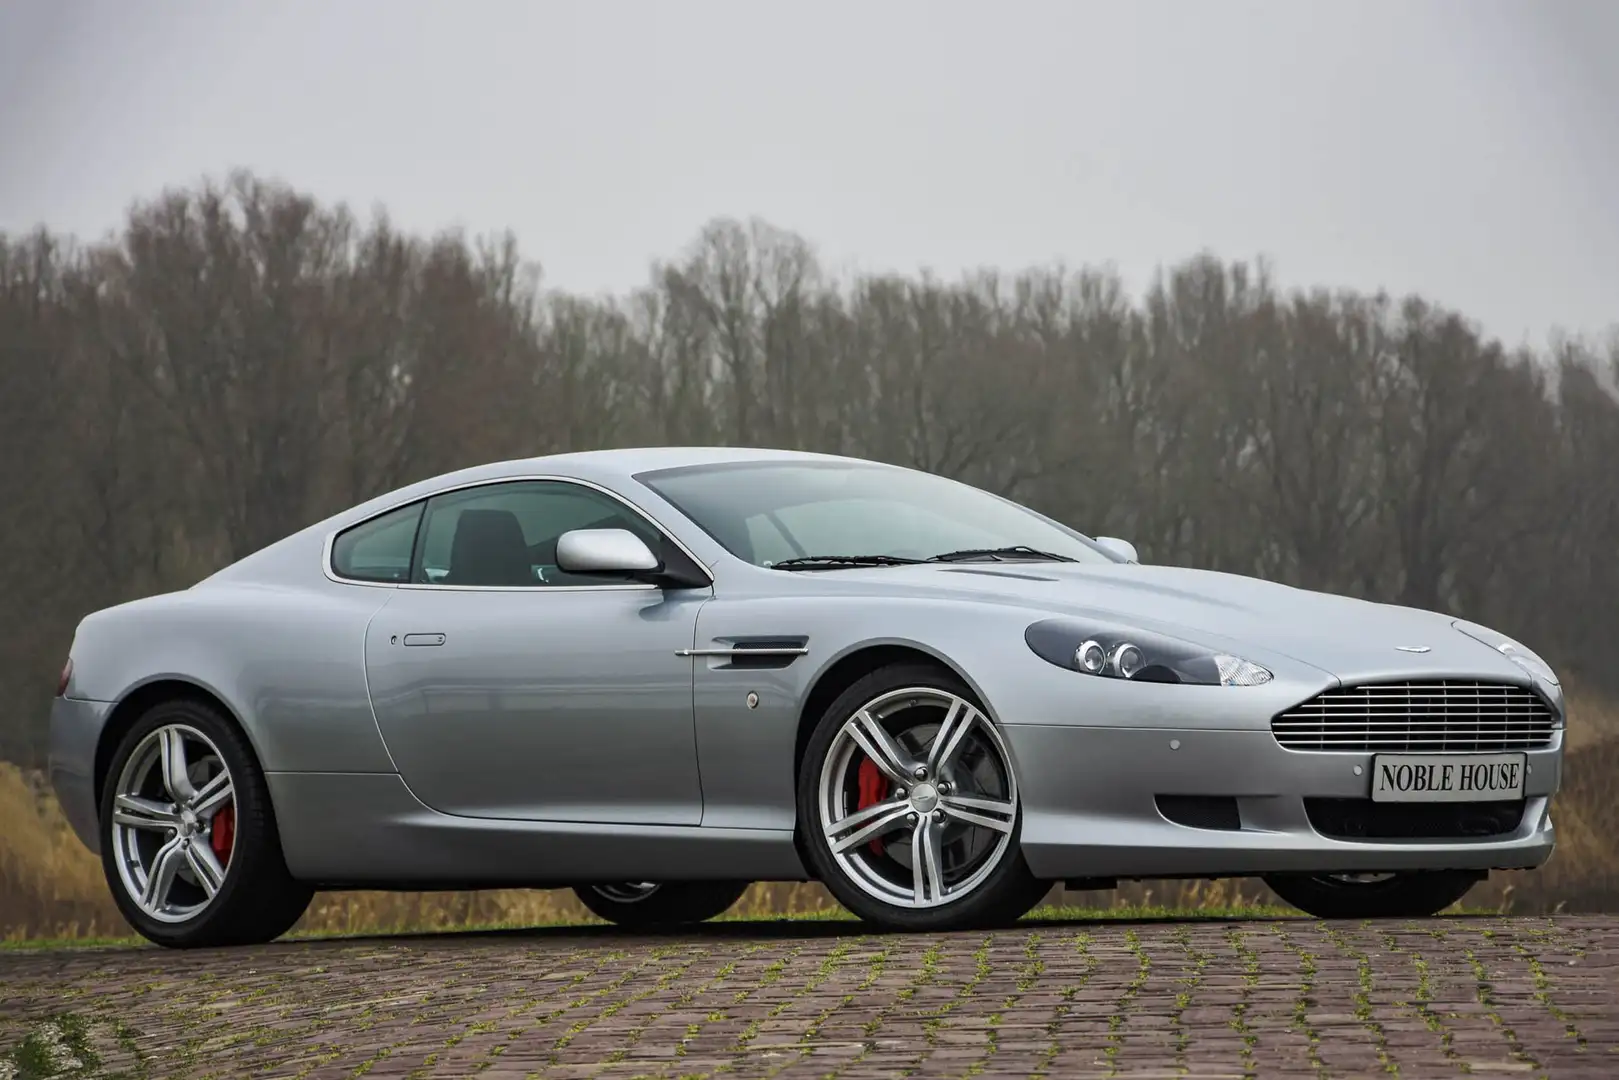 Aston Martin DB9 Coupe - only 1 owner from new! Argent - 2